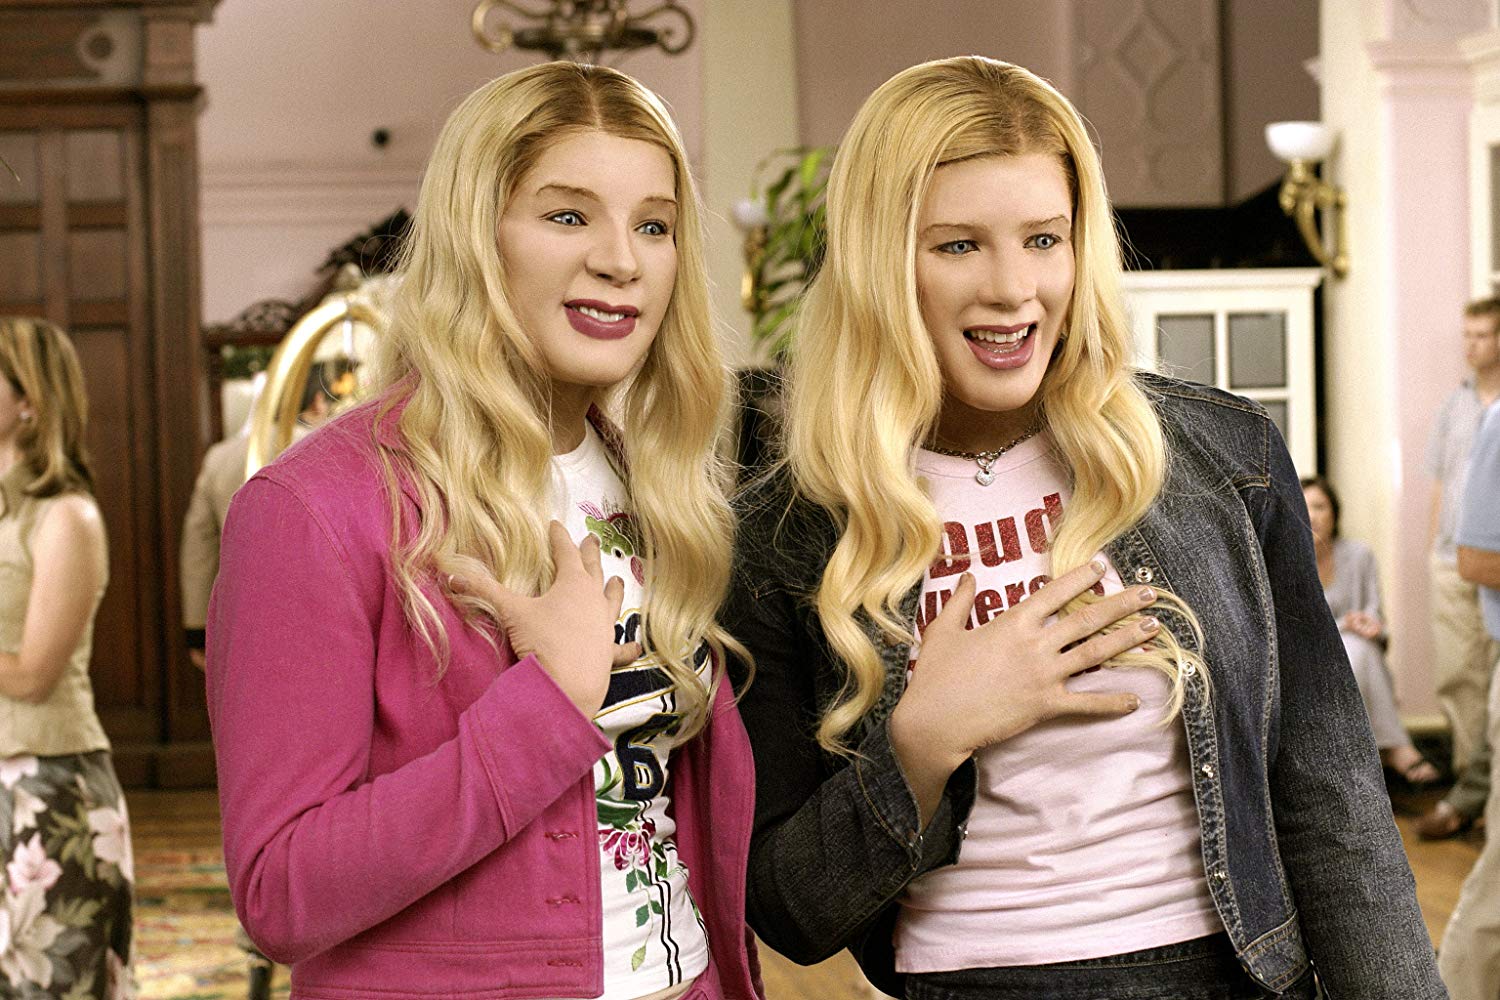 What’s Your IQ, Based Only on Your Opinions About Movies? White Chicks